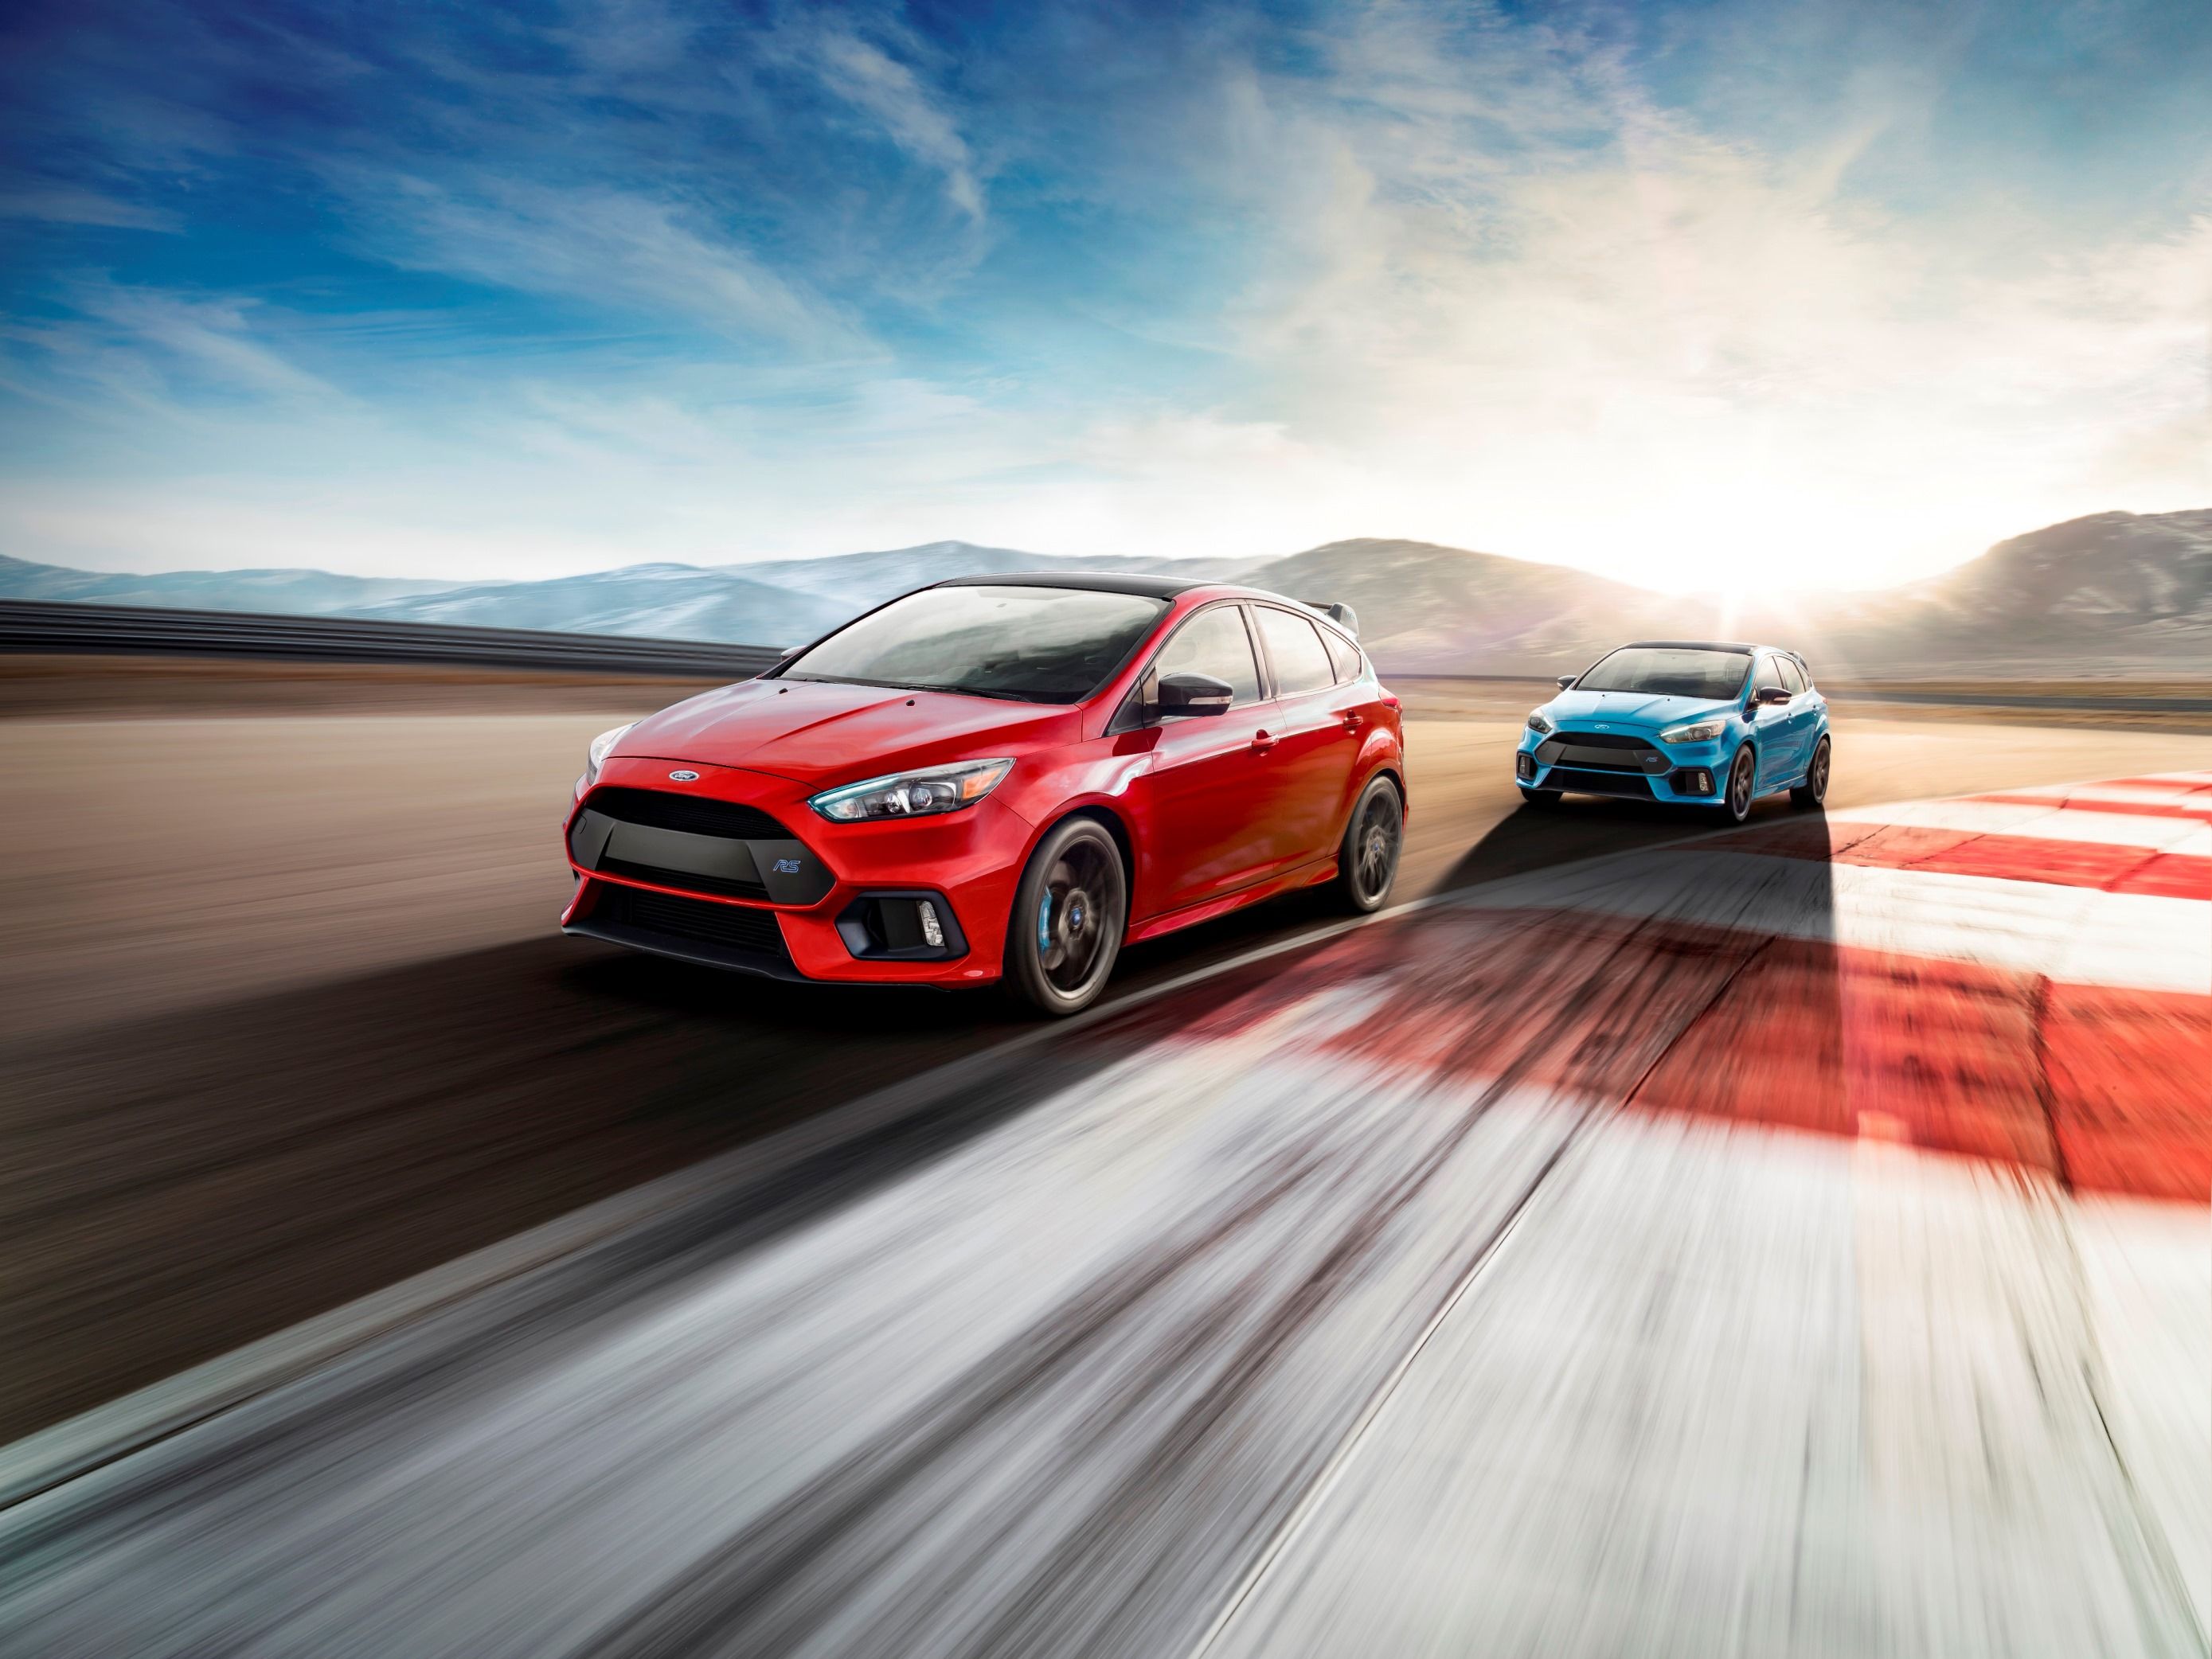 The Next Ford Focus RS Might Be a Full Hybrid